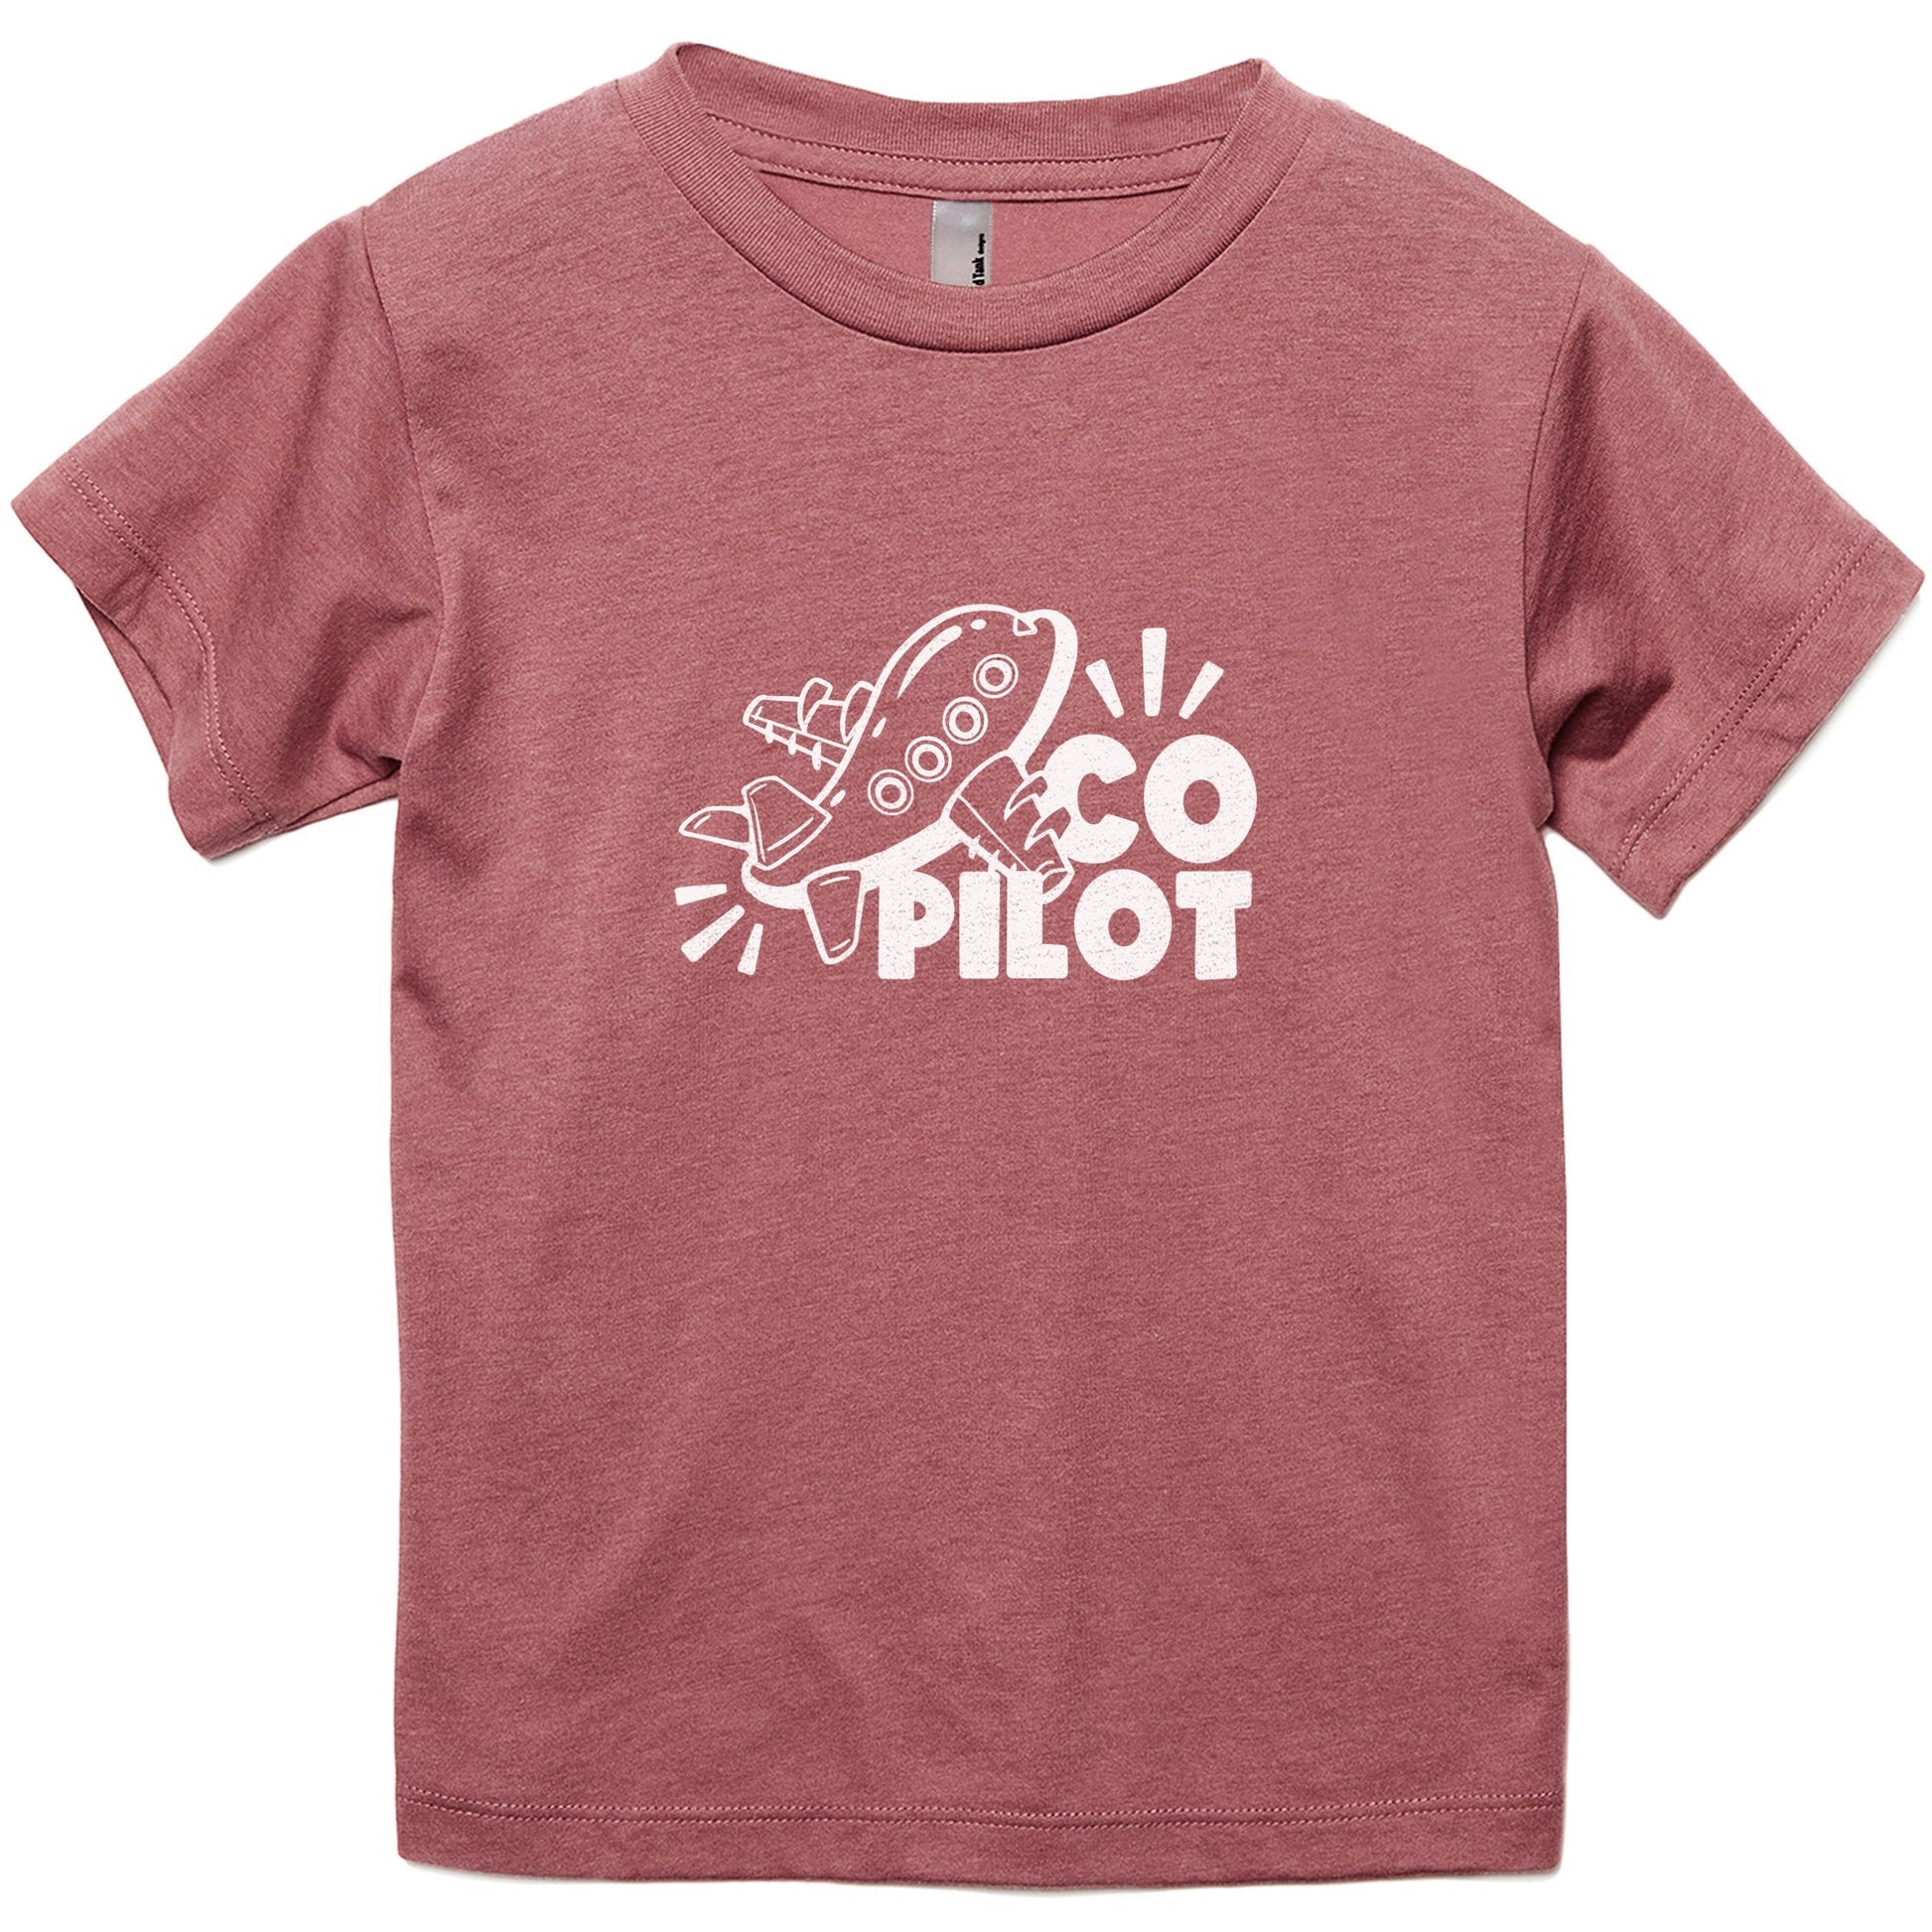 Co-Pilot - thread tank | Stories you can wear.